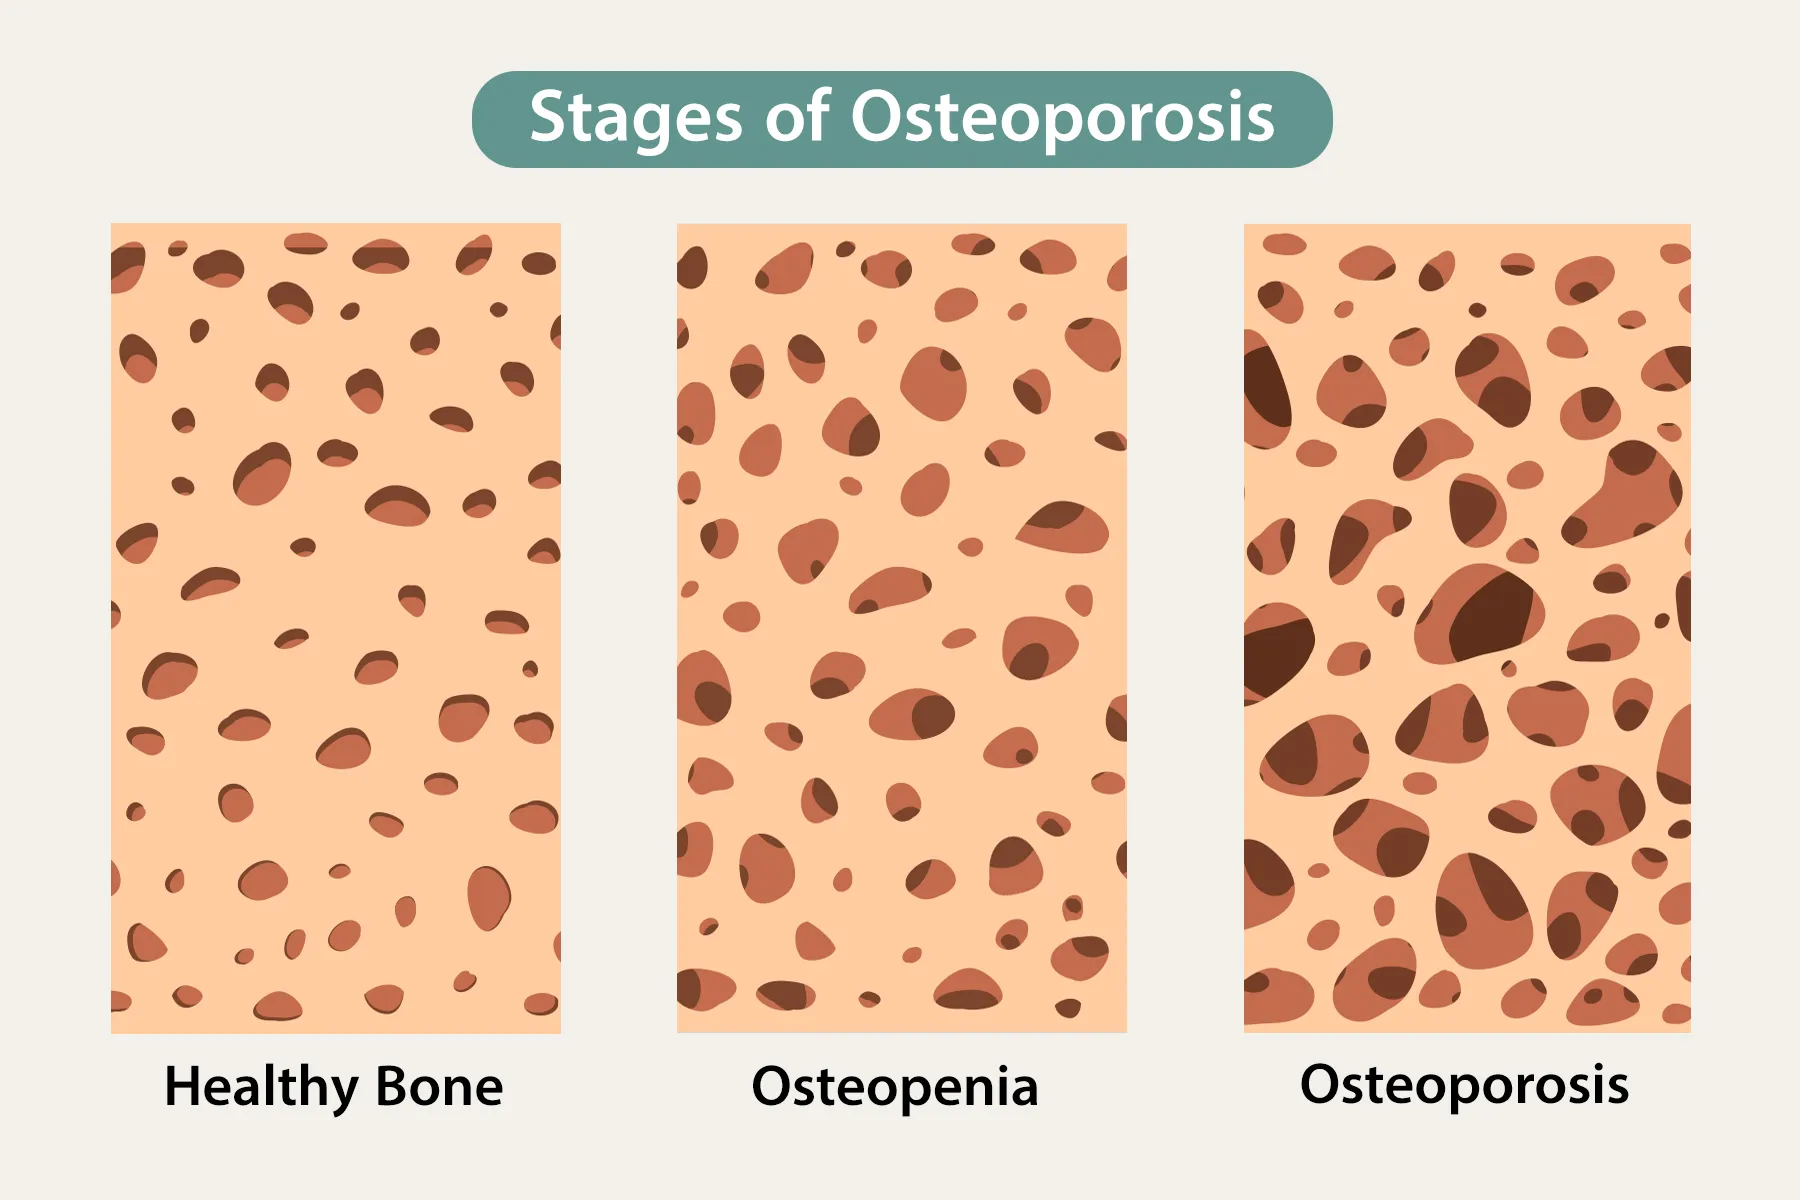 Stages of Osteoporosis infographic